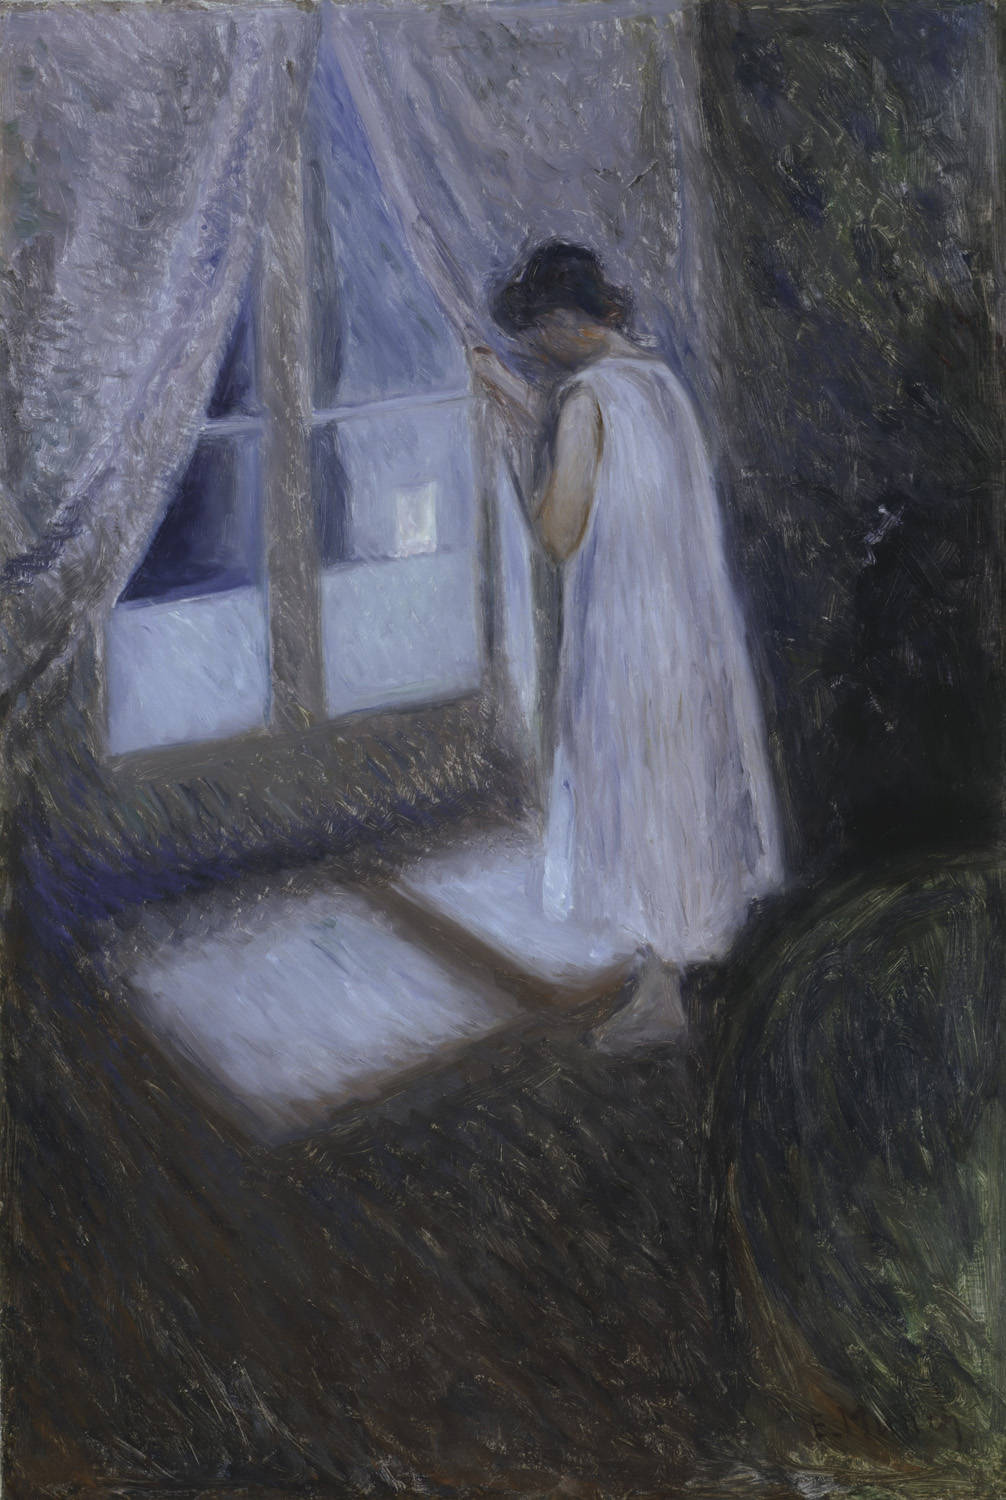 The Girl by the Window by Edvard Munch - 1893 - 96.5 x 65.4 cm Art Institute of Chicago